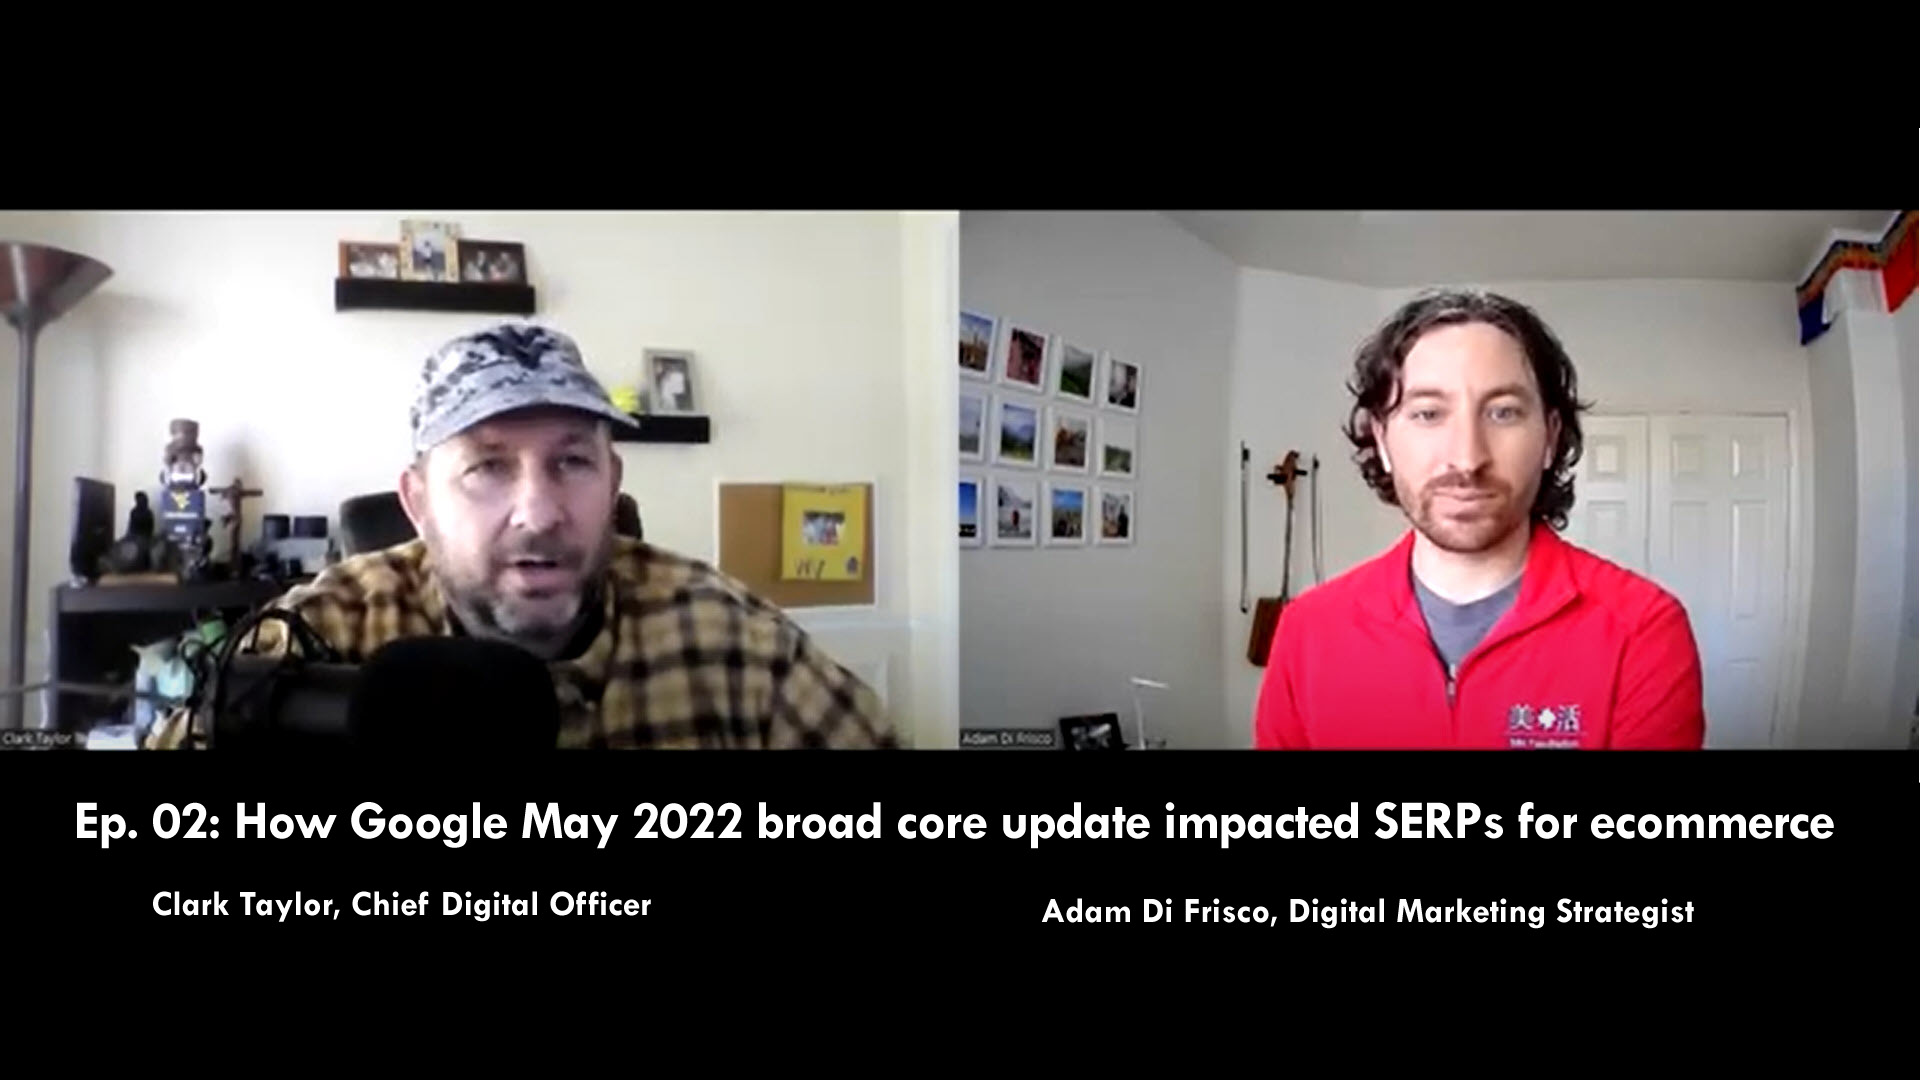 How Google May 2022 Broad Core Update Impacted SERPs for Ecommerce